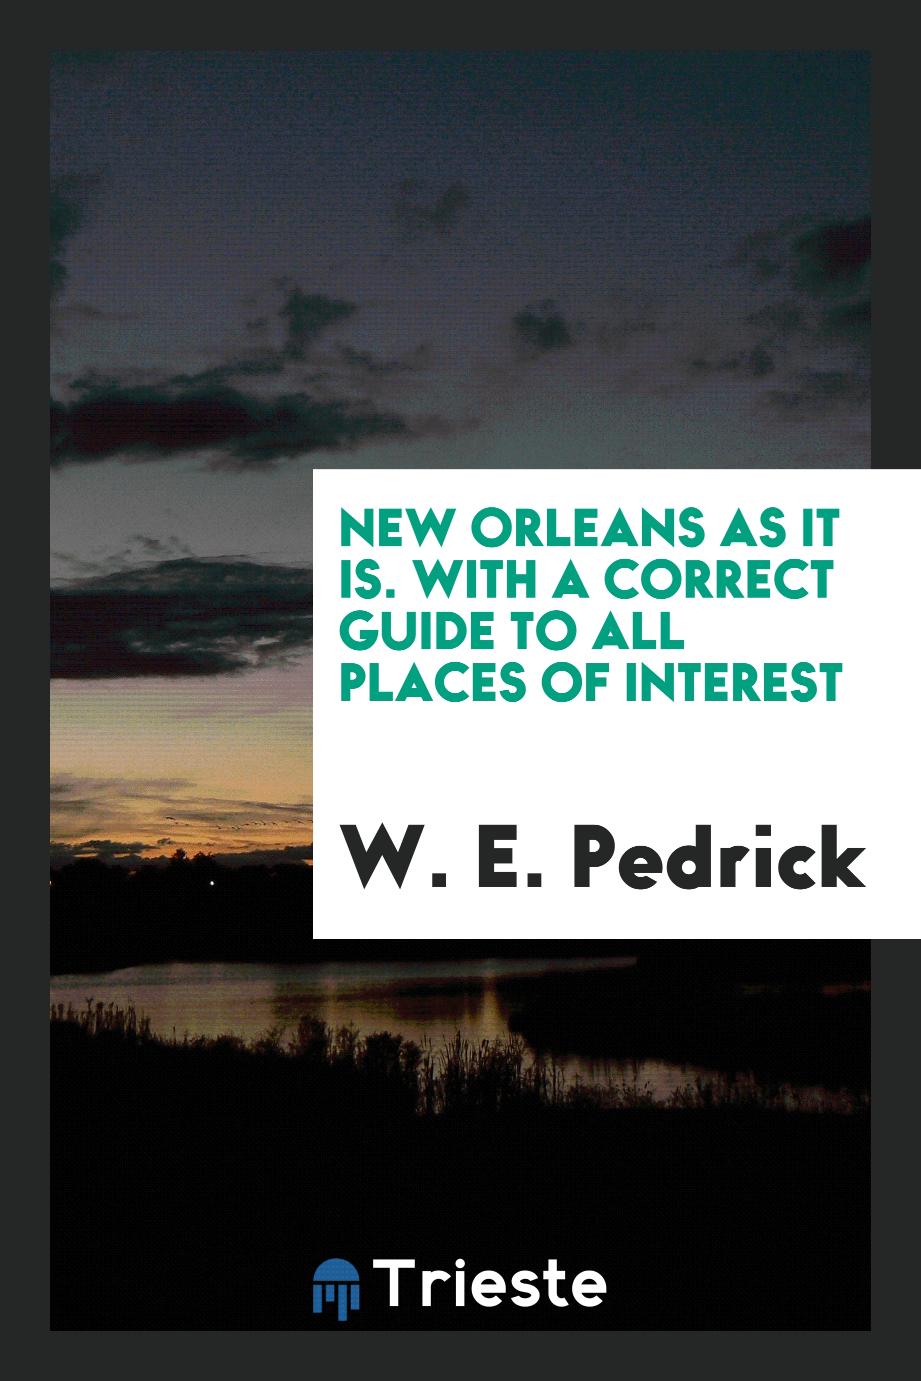 New Orleans as it is. With a correct guide to all places of interest